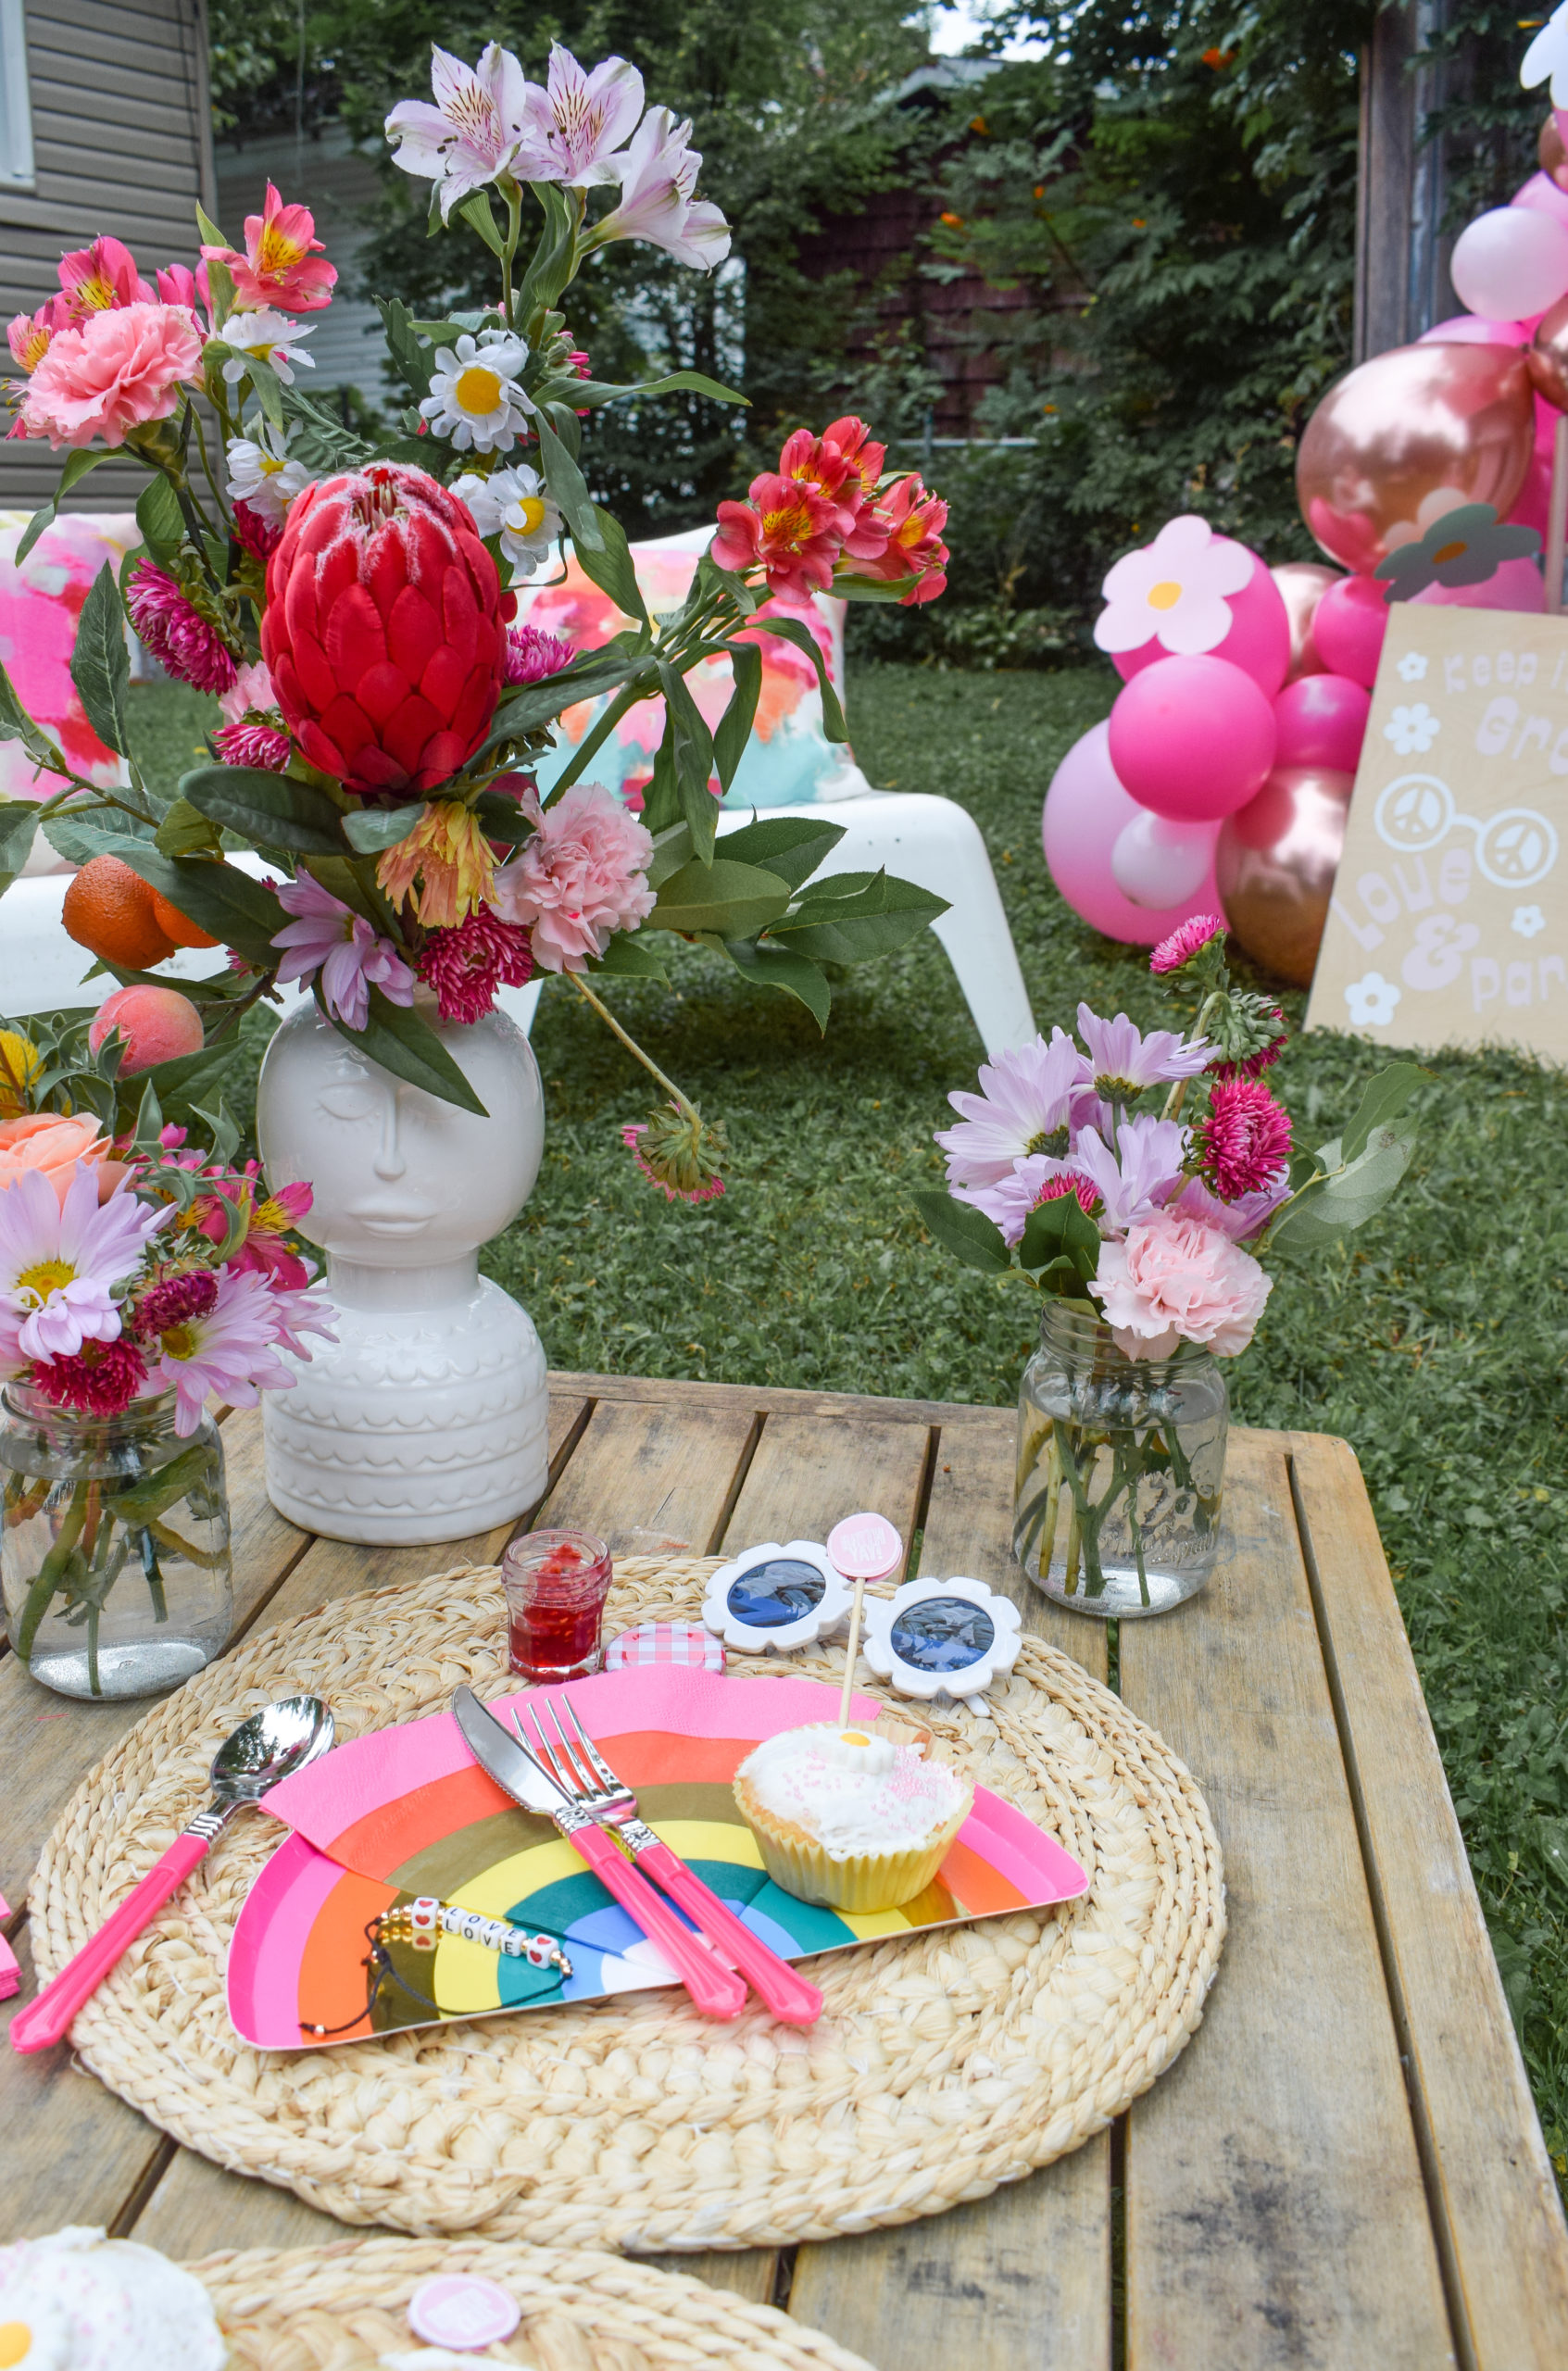 It's time for some groovy diy birthday party decor! Using good old fashioned DIYs and a few new kits from FISKARS, I created a groovy party.